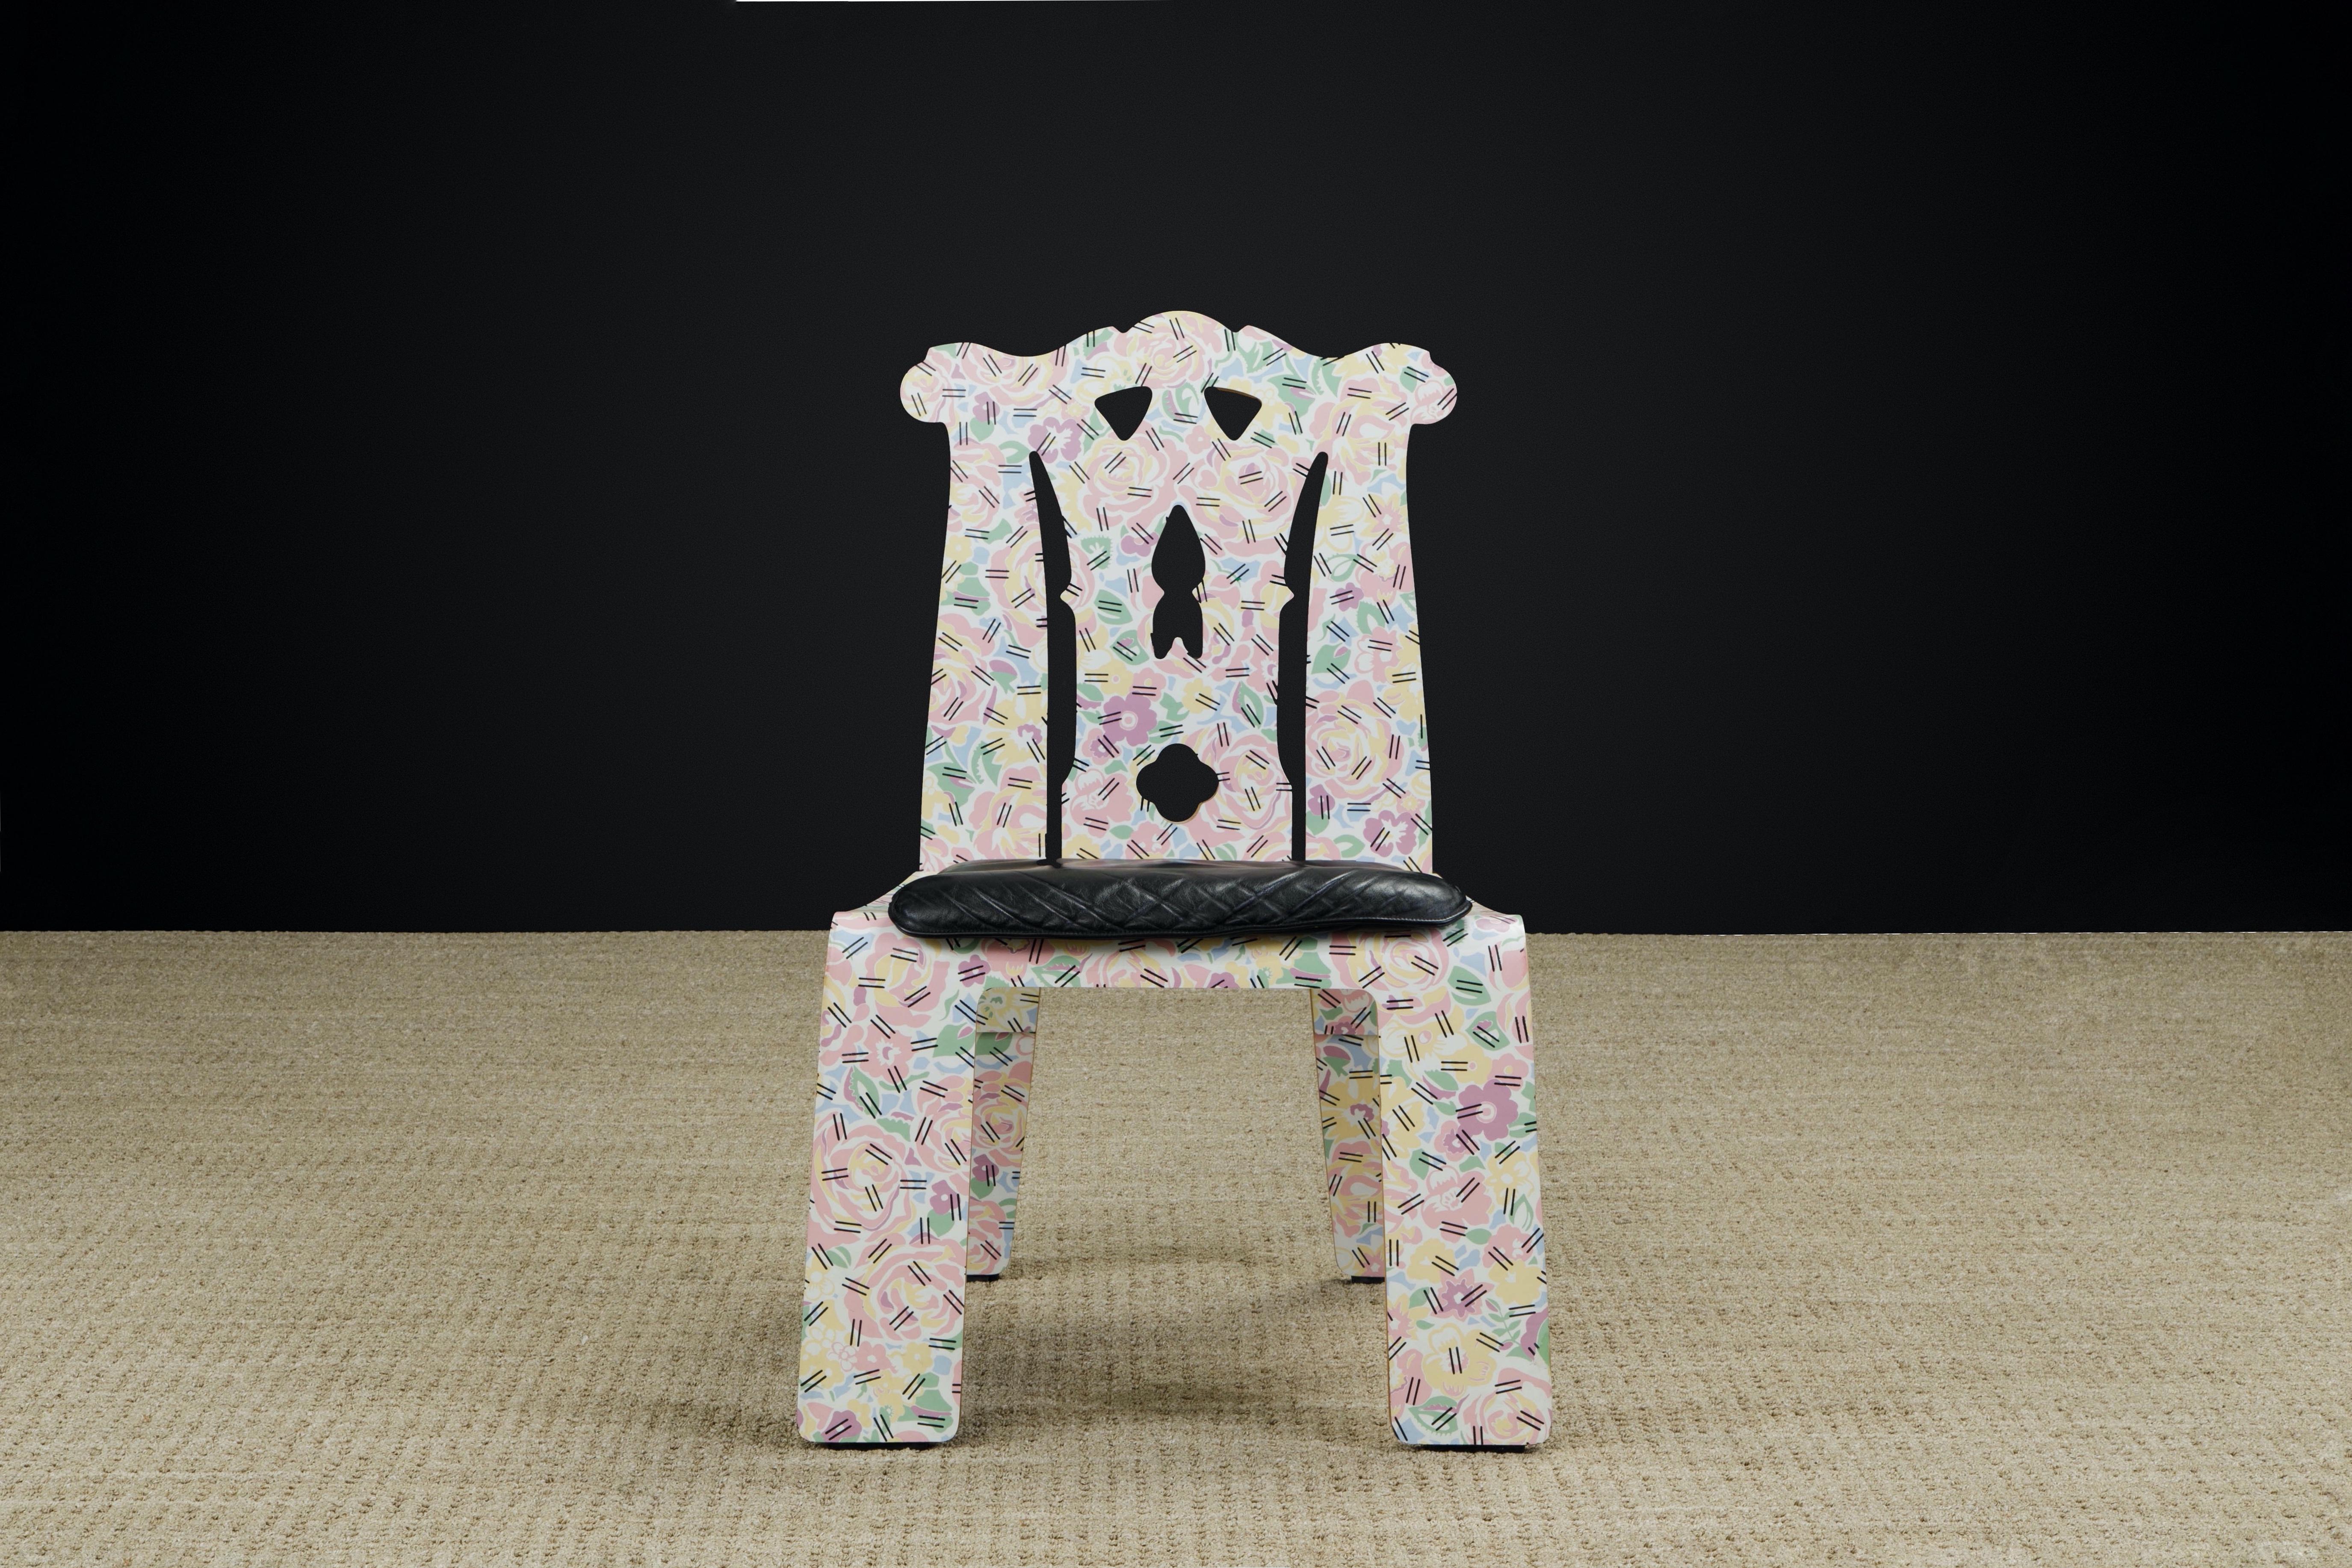 This rare and sought after collectors chair is called the 'Chippendale' chair in the 'Grandmother' fabric pattern by Robert Venturi and Denise Scott Brown for Knoll International, circa 1985. 

This design was part of the 'Venturi Collection' for